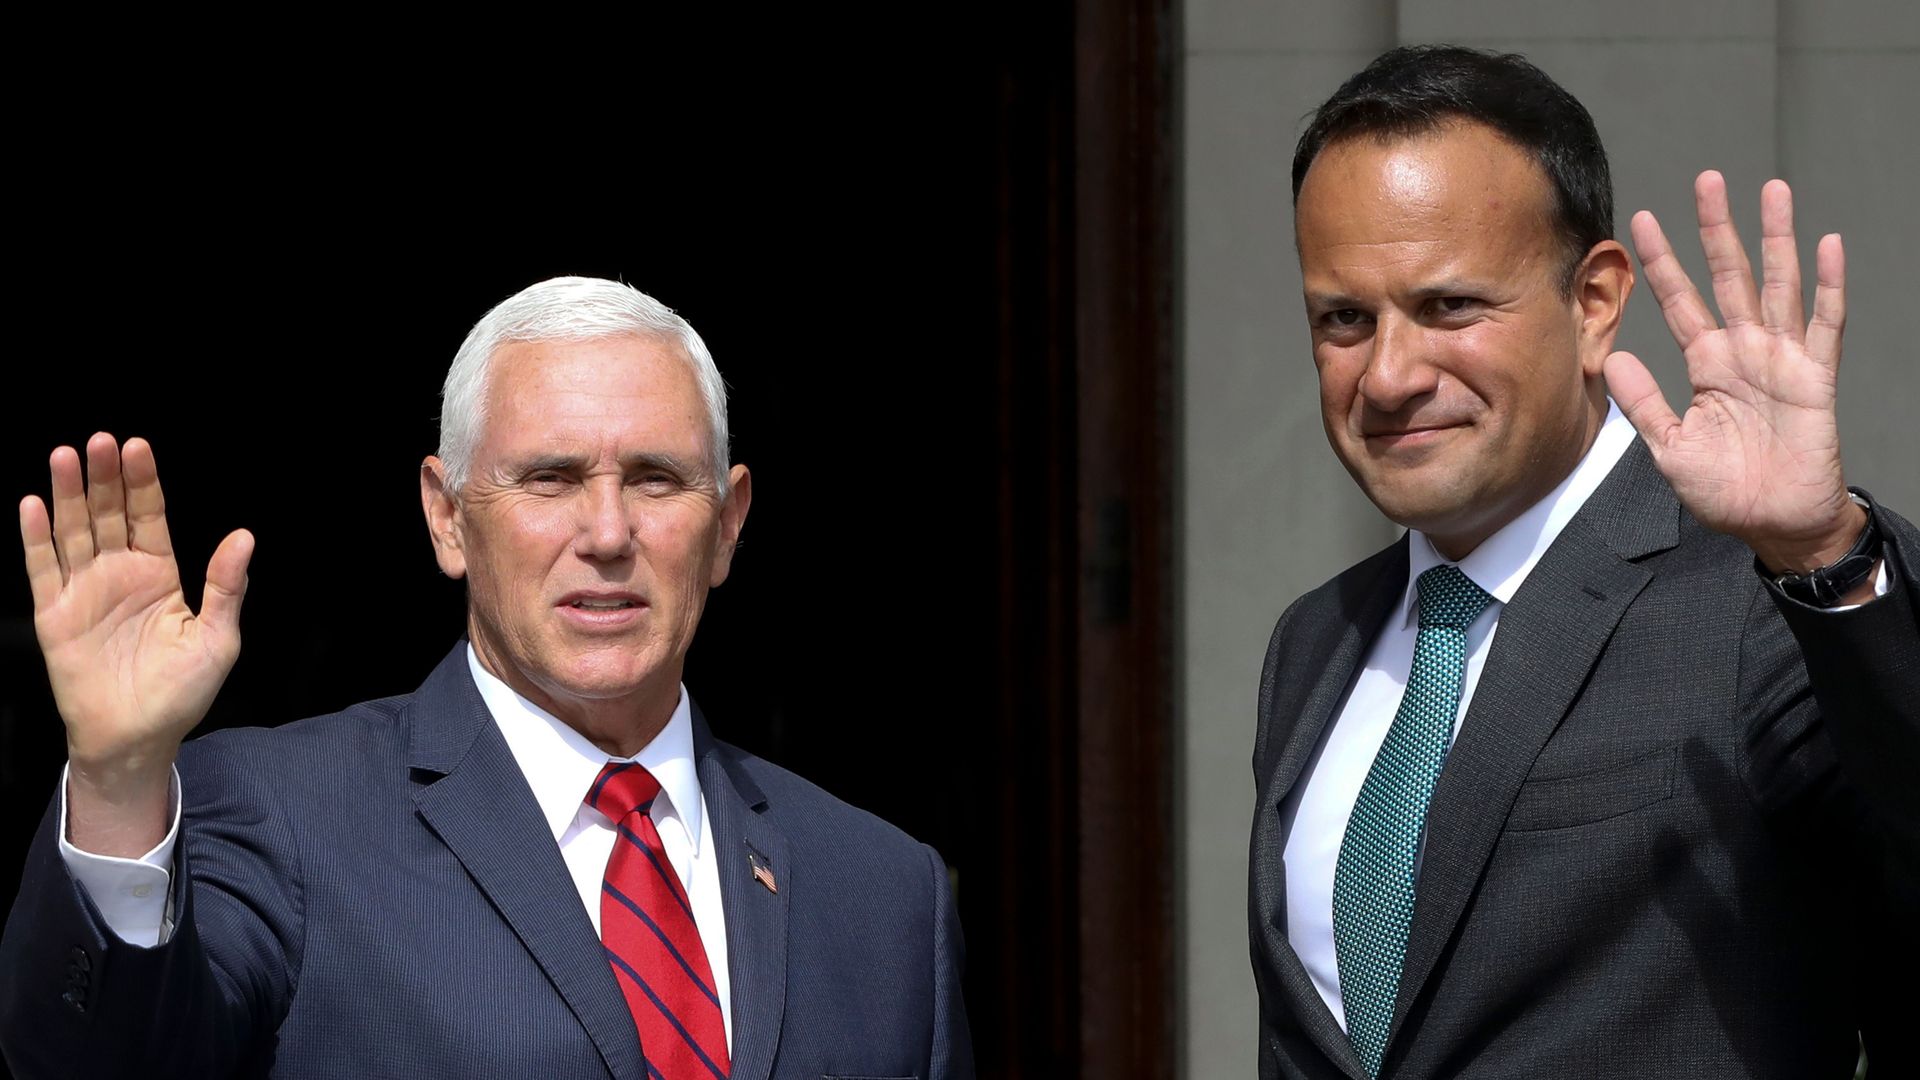 American Vice President Mike Pence meeting with Irish Prime Minister Leo Varadkar in Dublin.